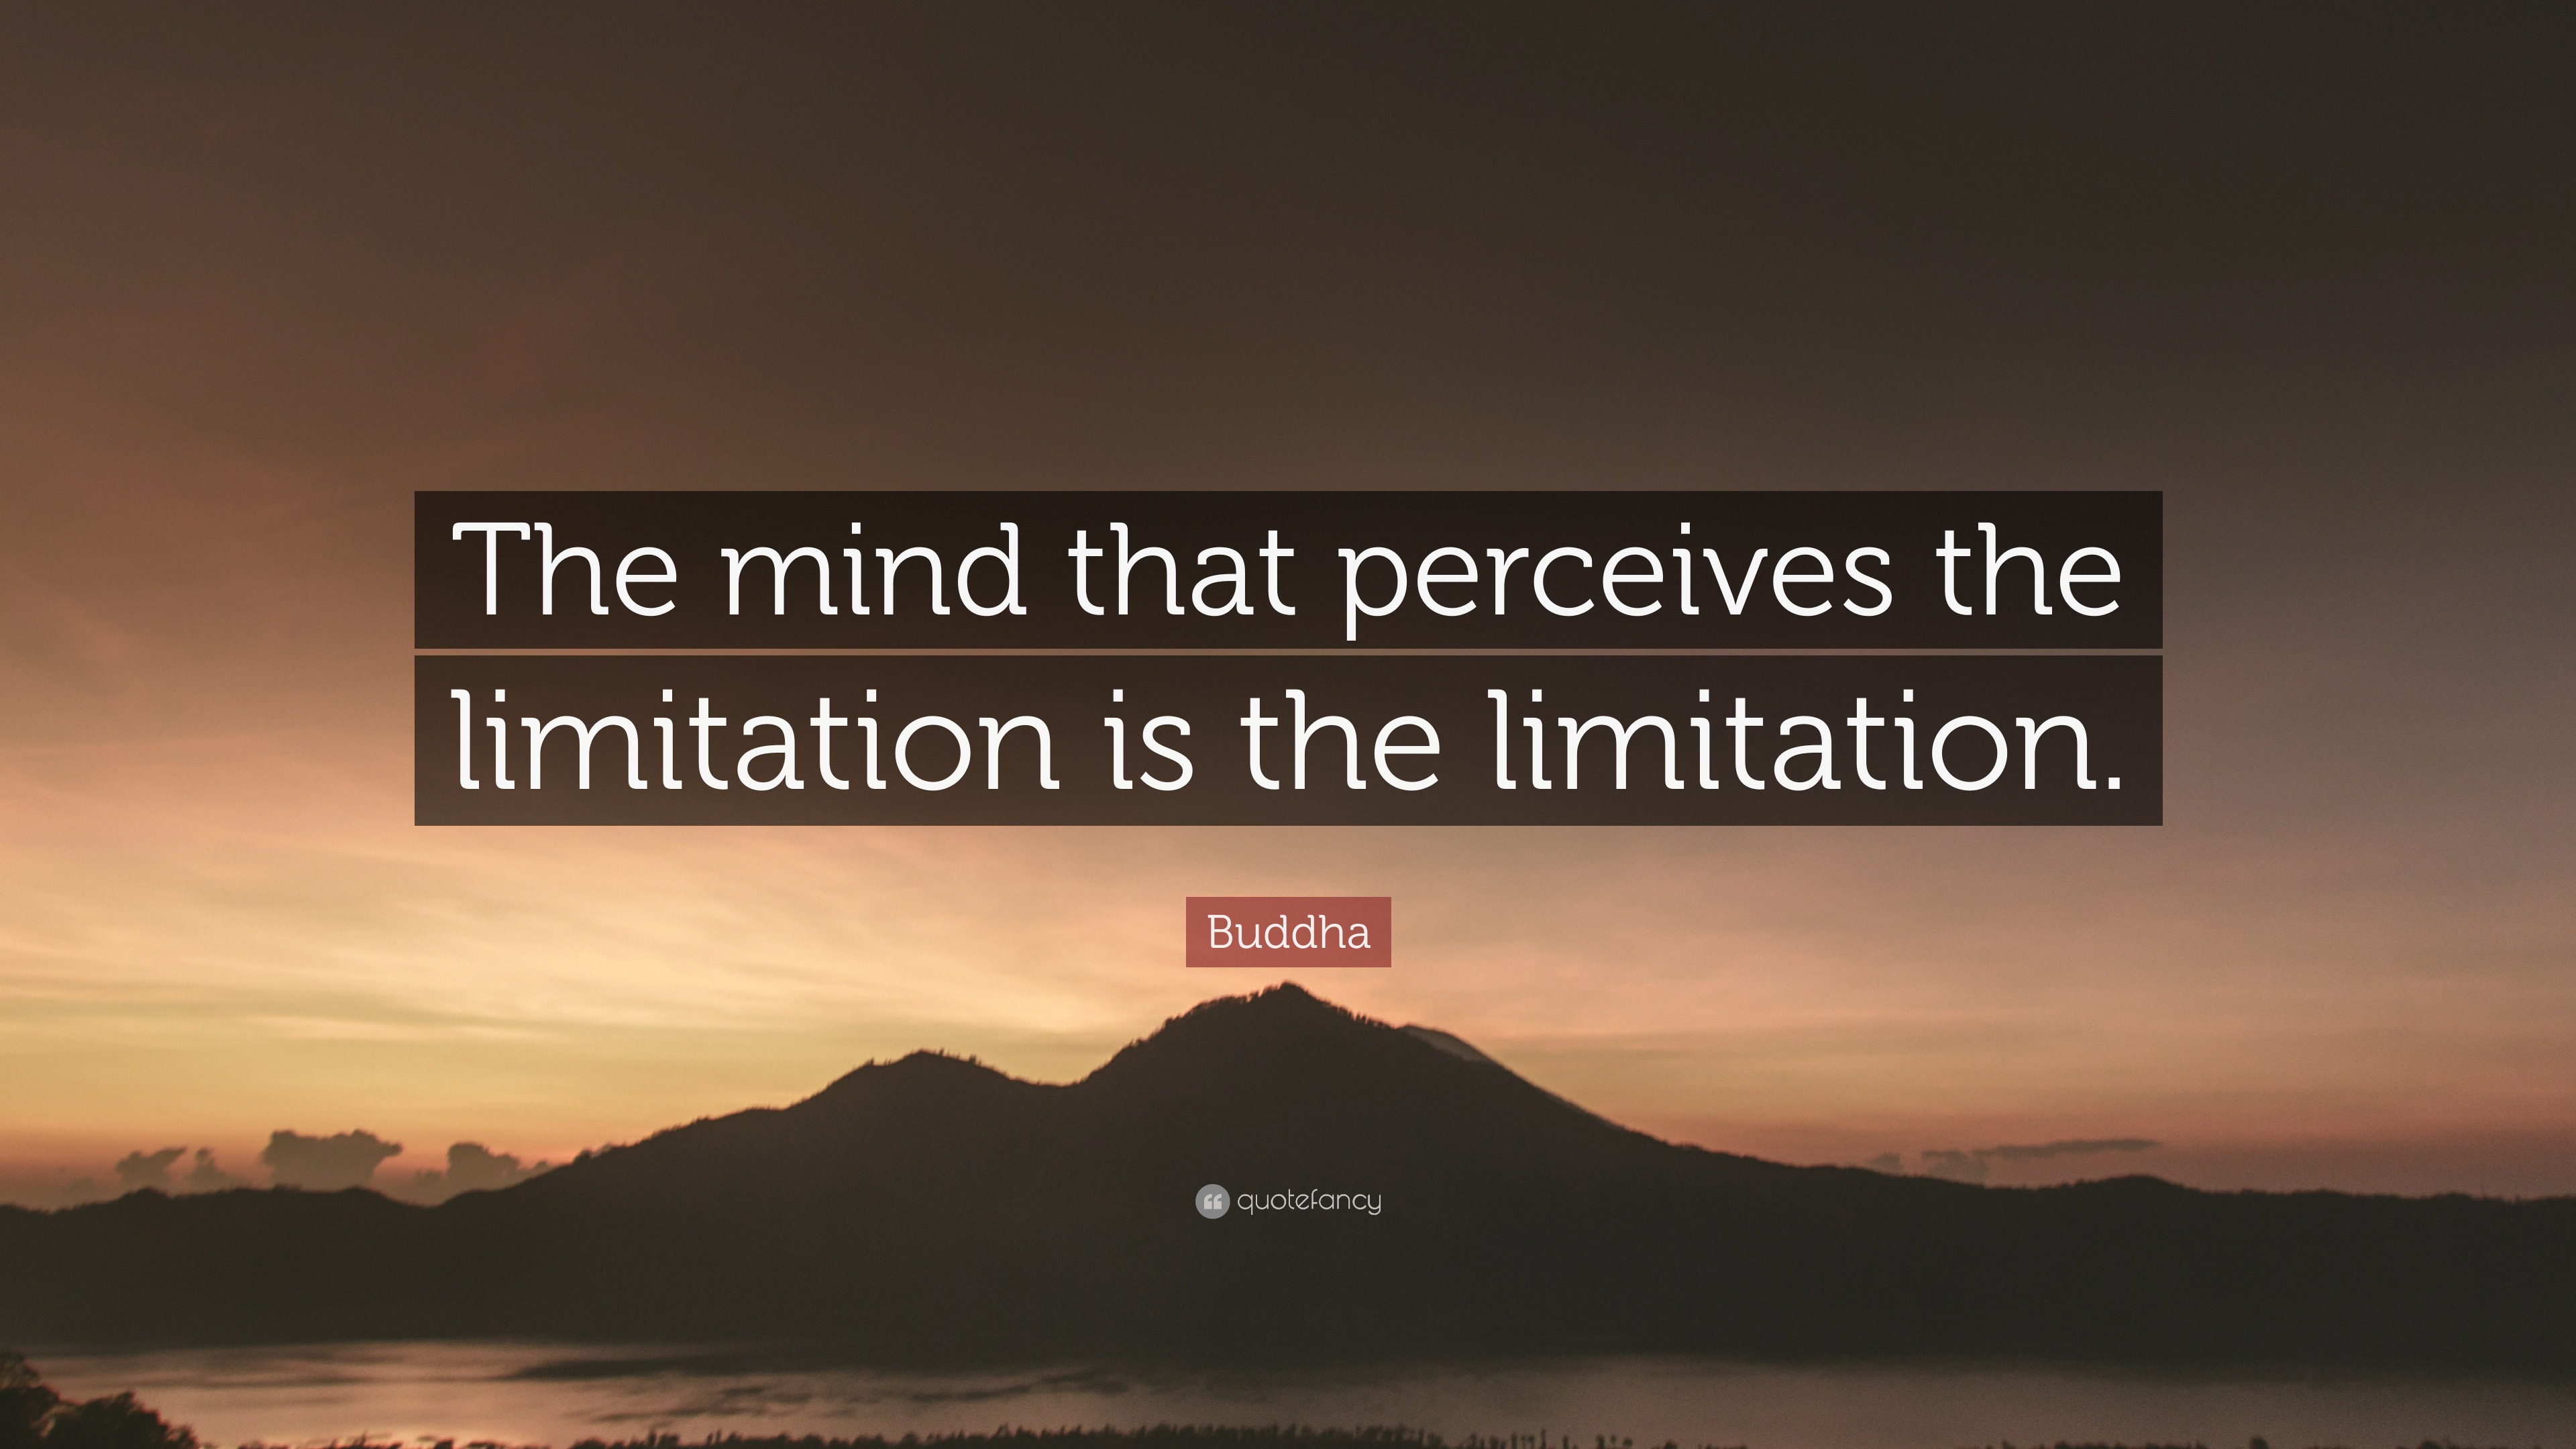 Buddha Quote: “The mind that perceives the limitation is the limitation.”